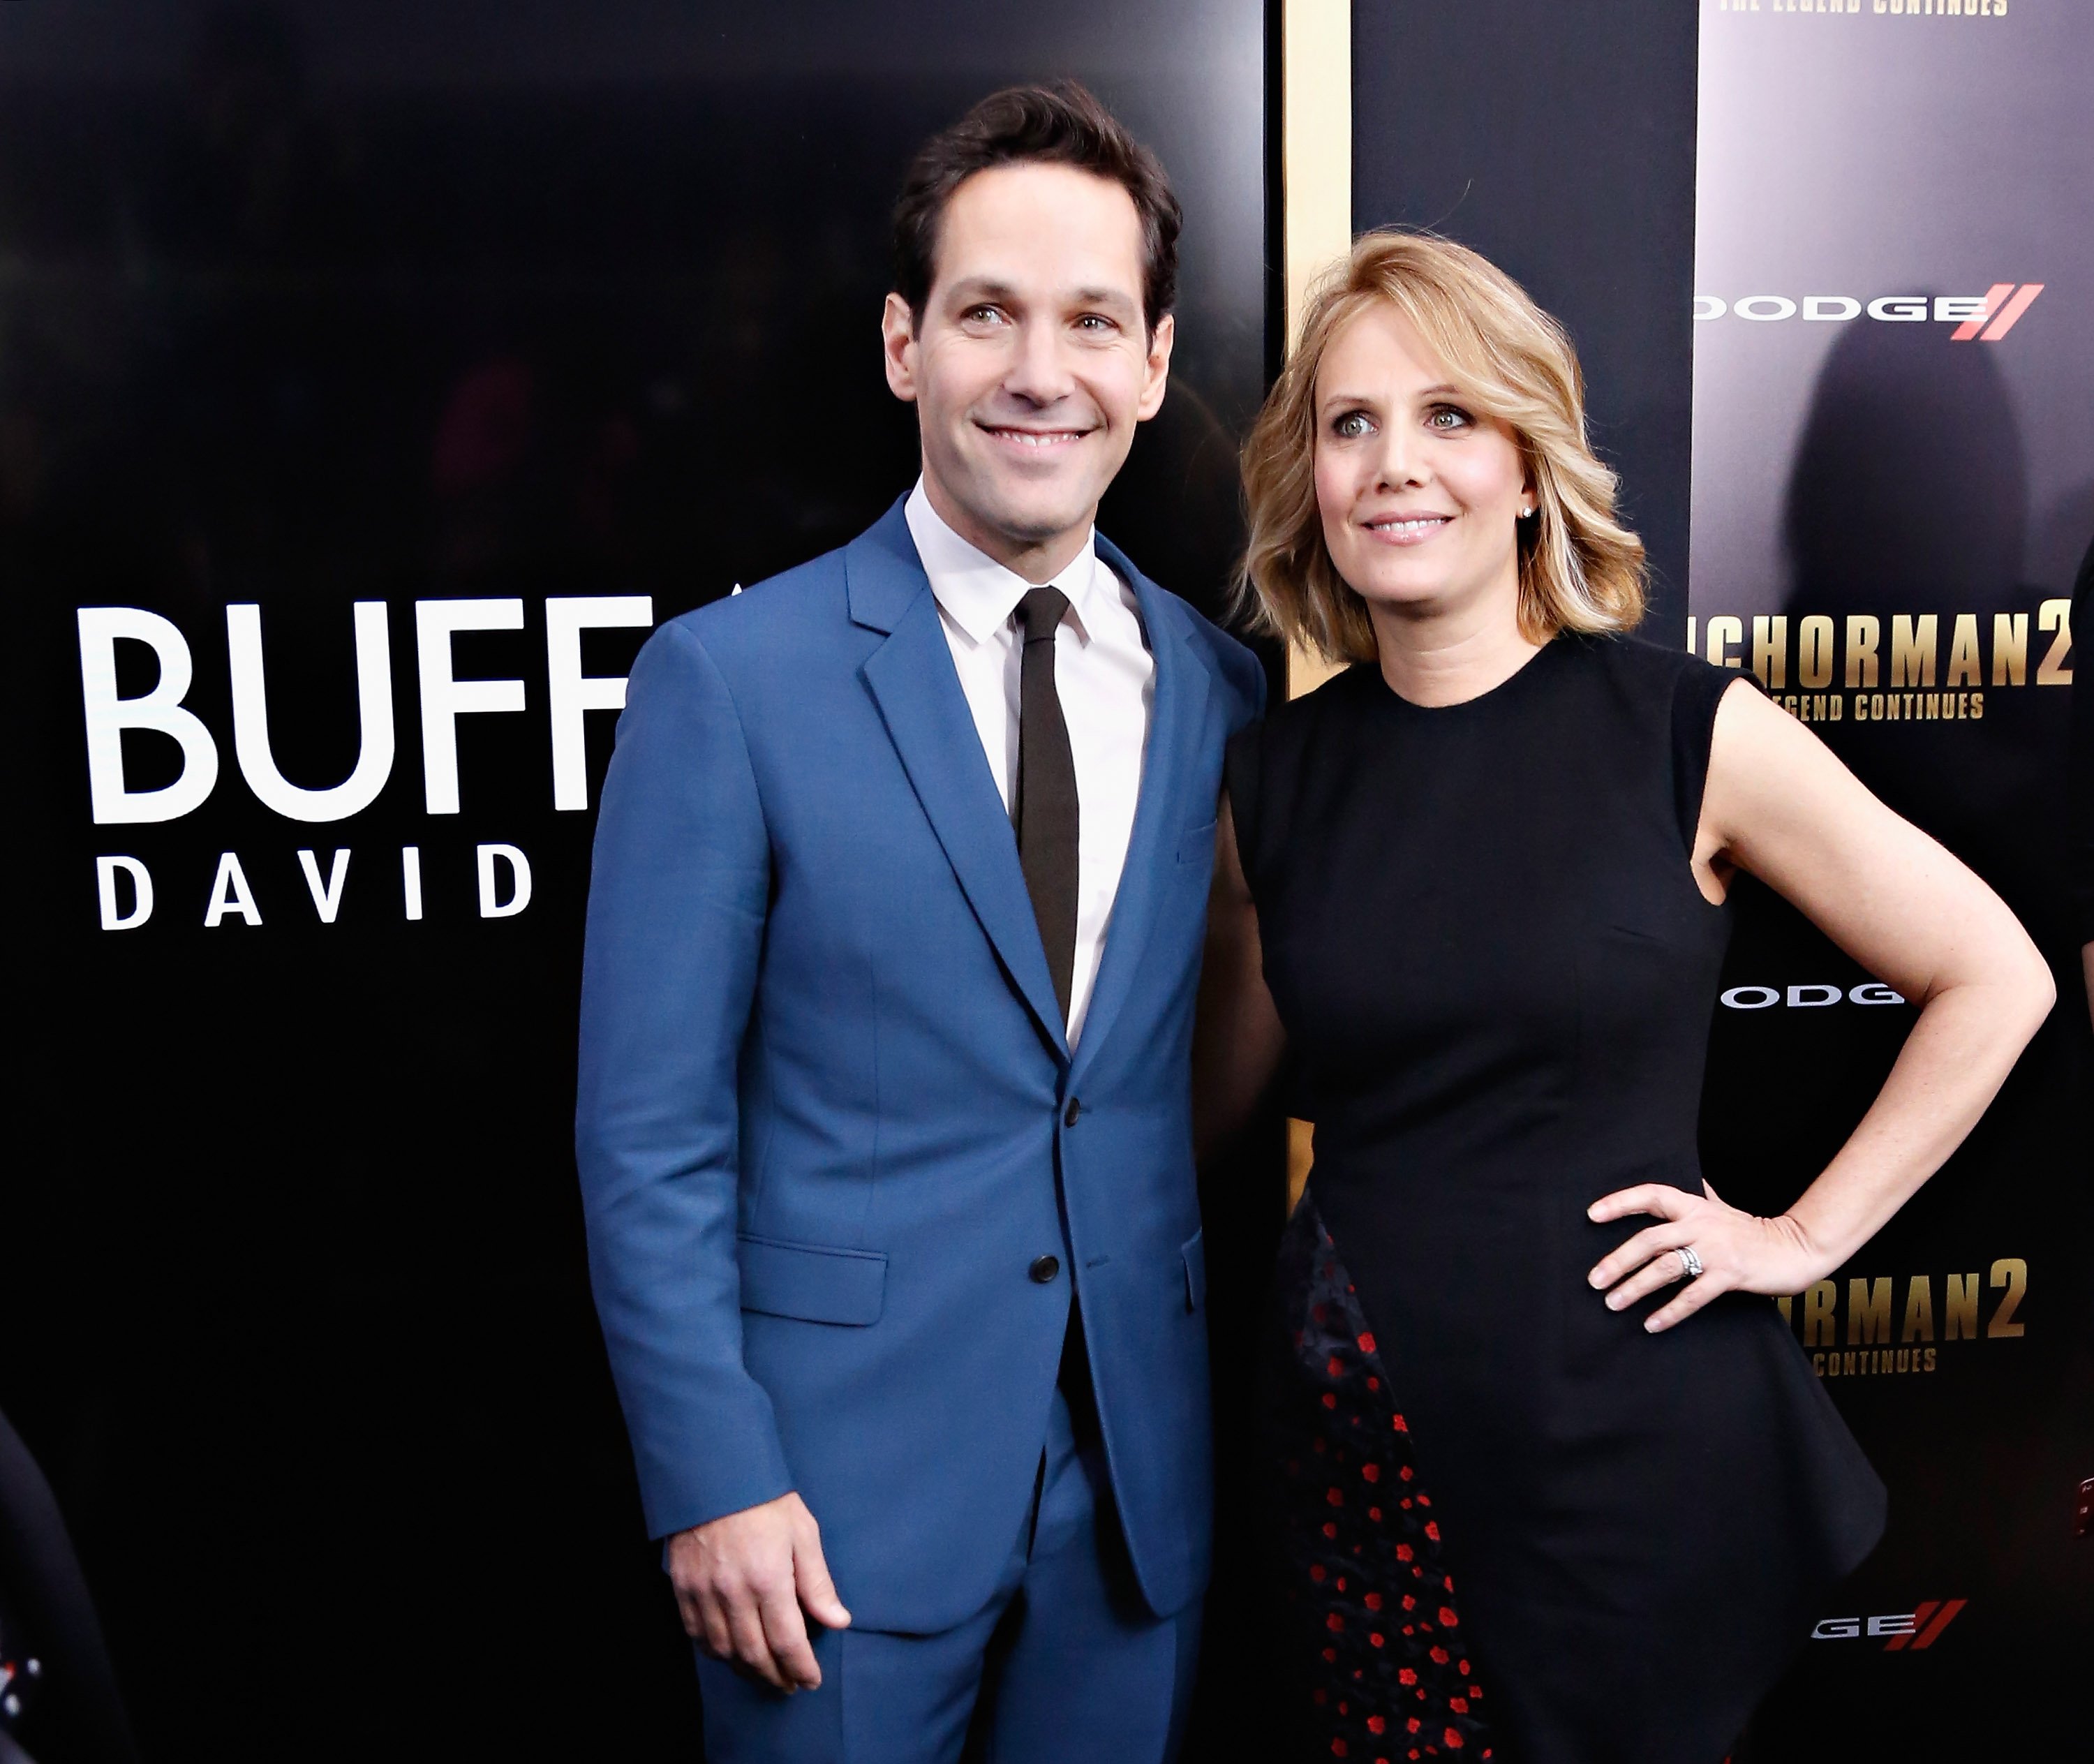 Paul Rudd and his wife Julie Yaeger attend the "Anchorman 2: The Legend Continues" on December 15, 2013 in New York City. | Source: Getty Images